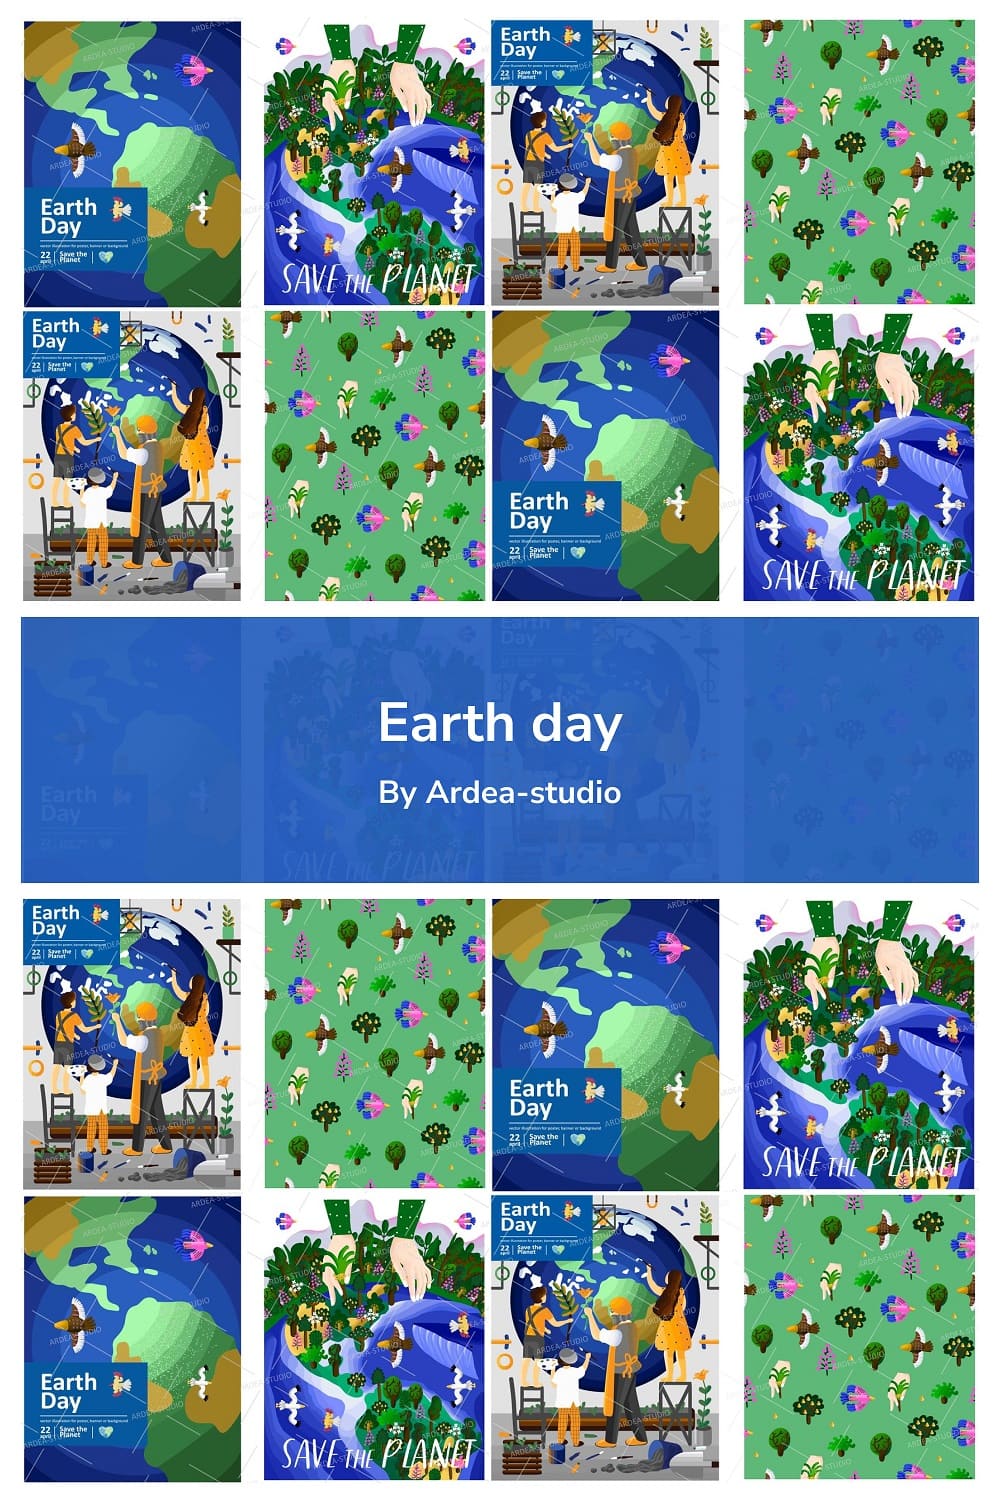 Flora and fauna are depicted on green and blue backgrounds.